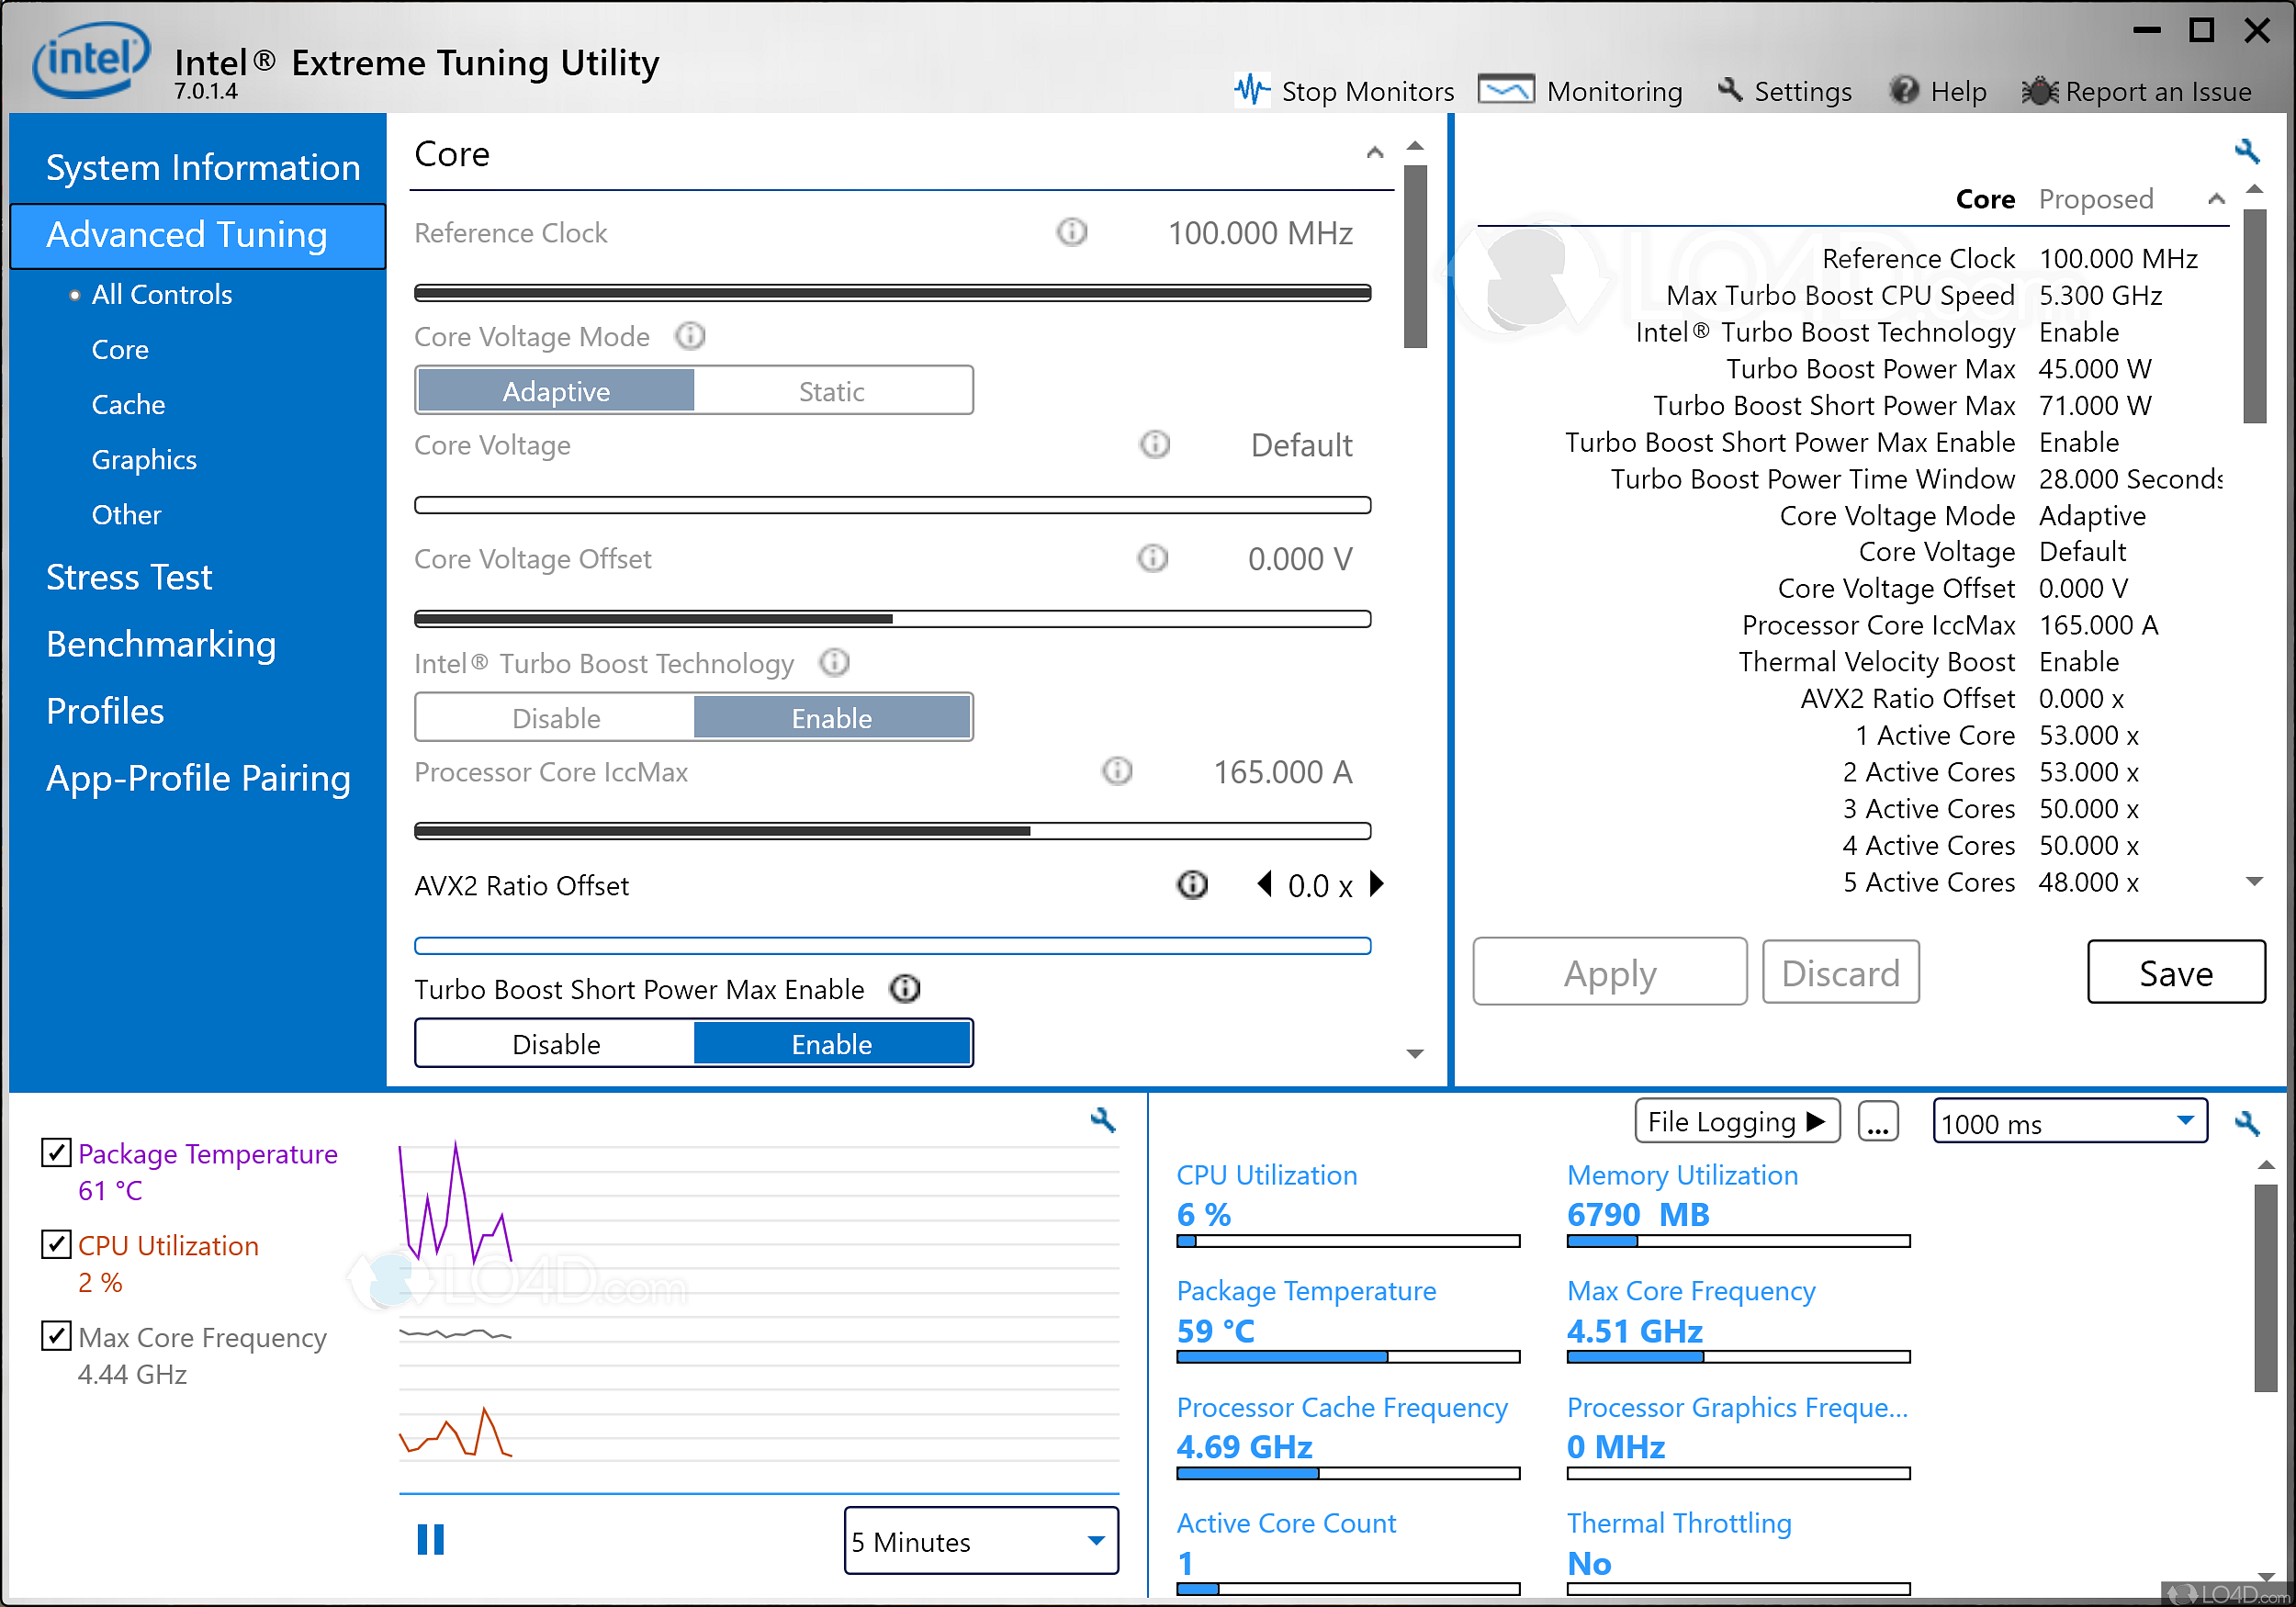 Intel Extreme Tuning Utility 7.12.0.29 free download